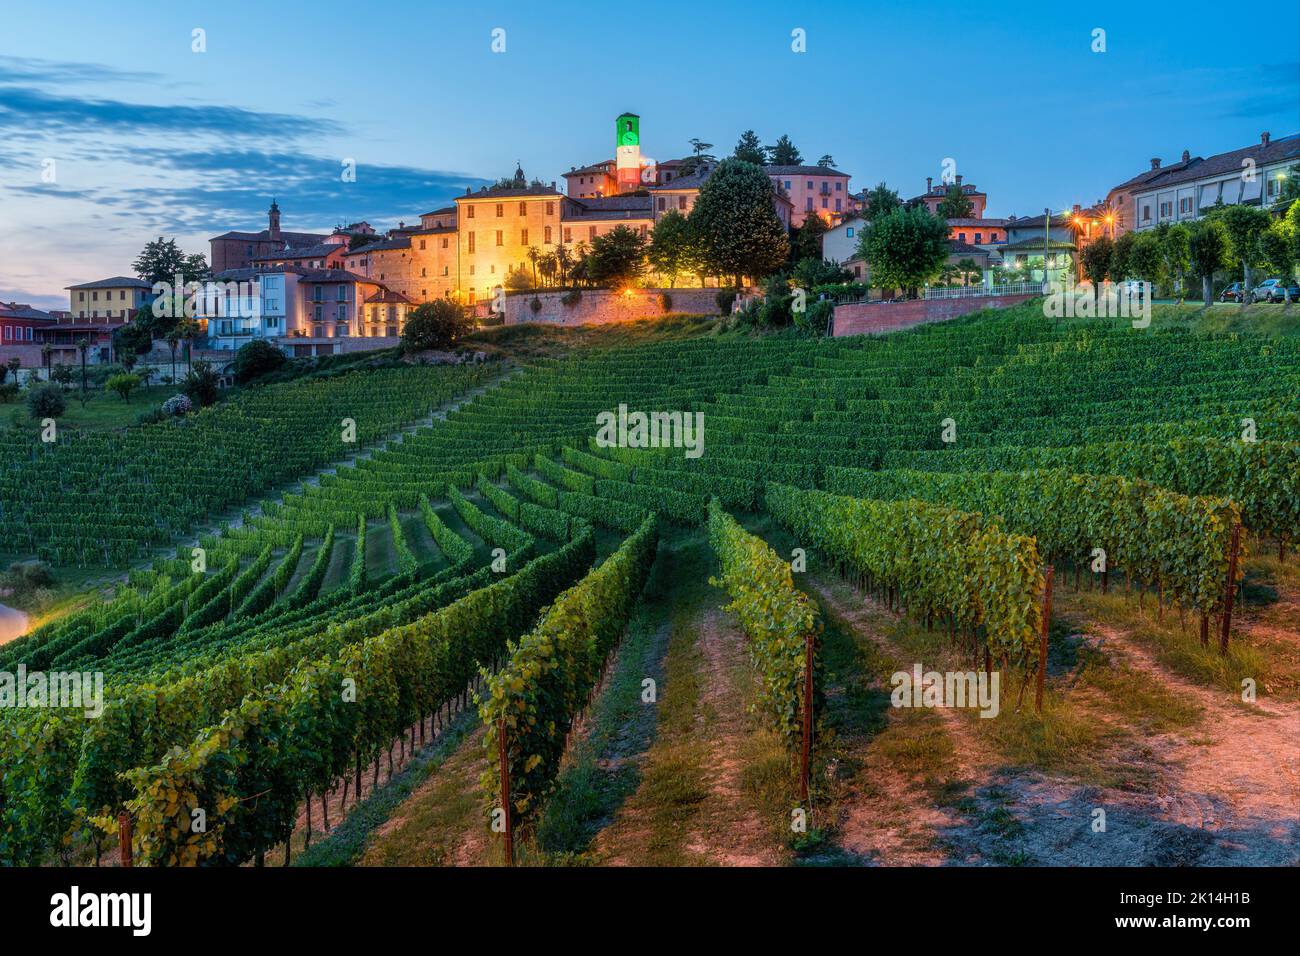 Neive village illuminated in the evening. Langhe region of Piedmont, Cuneo, northern Italy. Stock Photo